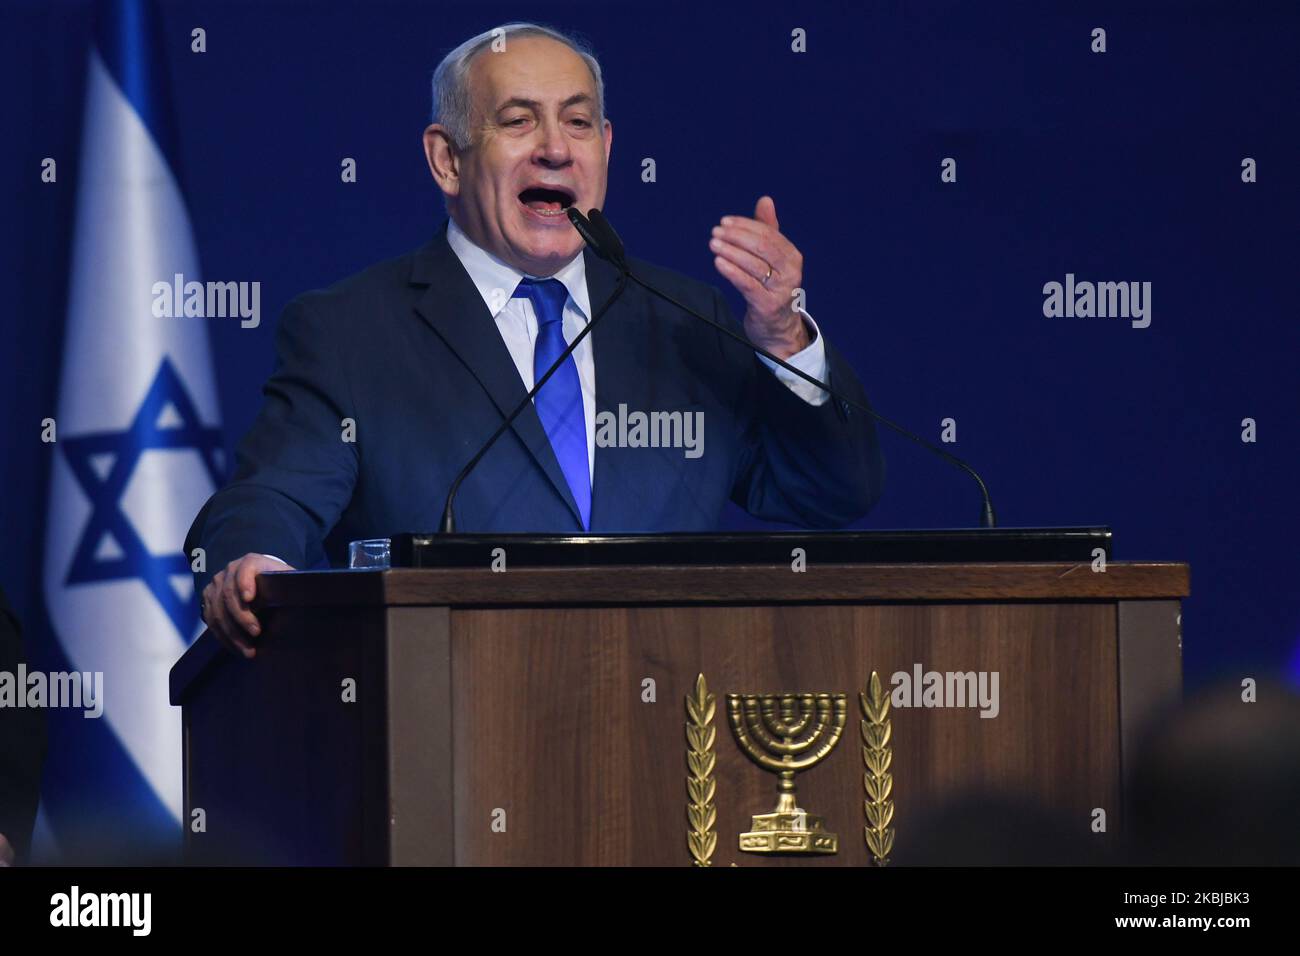 Israeli Prime Minister Benjamin Netanyahu gestures as he speaks to supporters following the announcement of exit polls in Israel's election at his Likud party headquarters in Tel Aviv. On Tuesday, March 3, 2020, in Tel Aviv, Israel. (Photo by Artur Widak/NurPhoto) Stock Photo